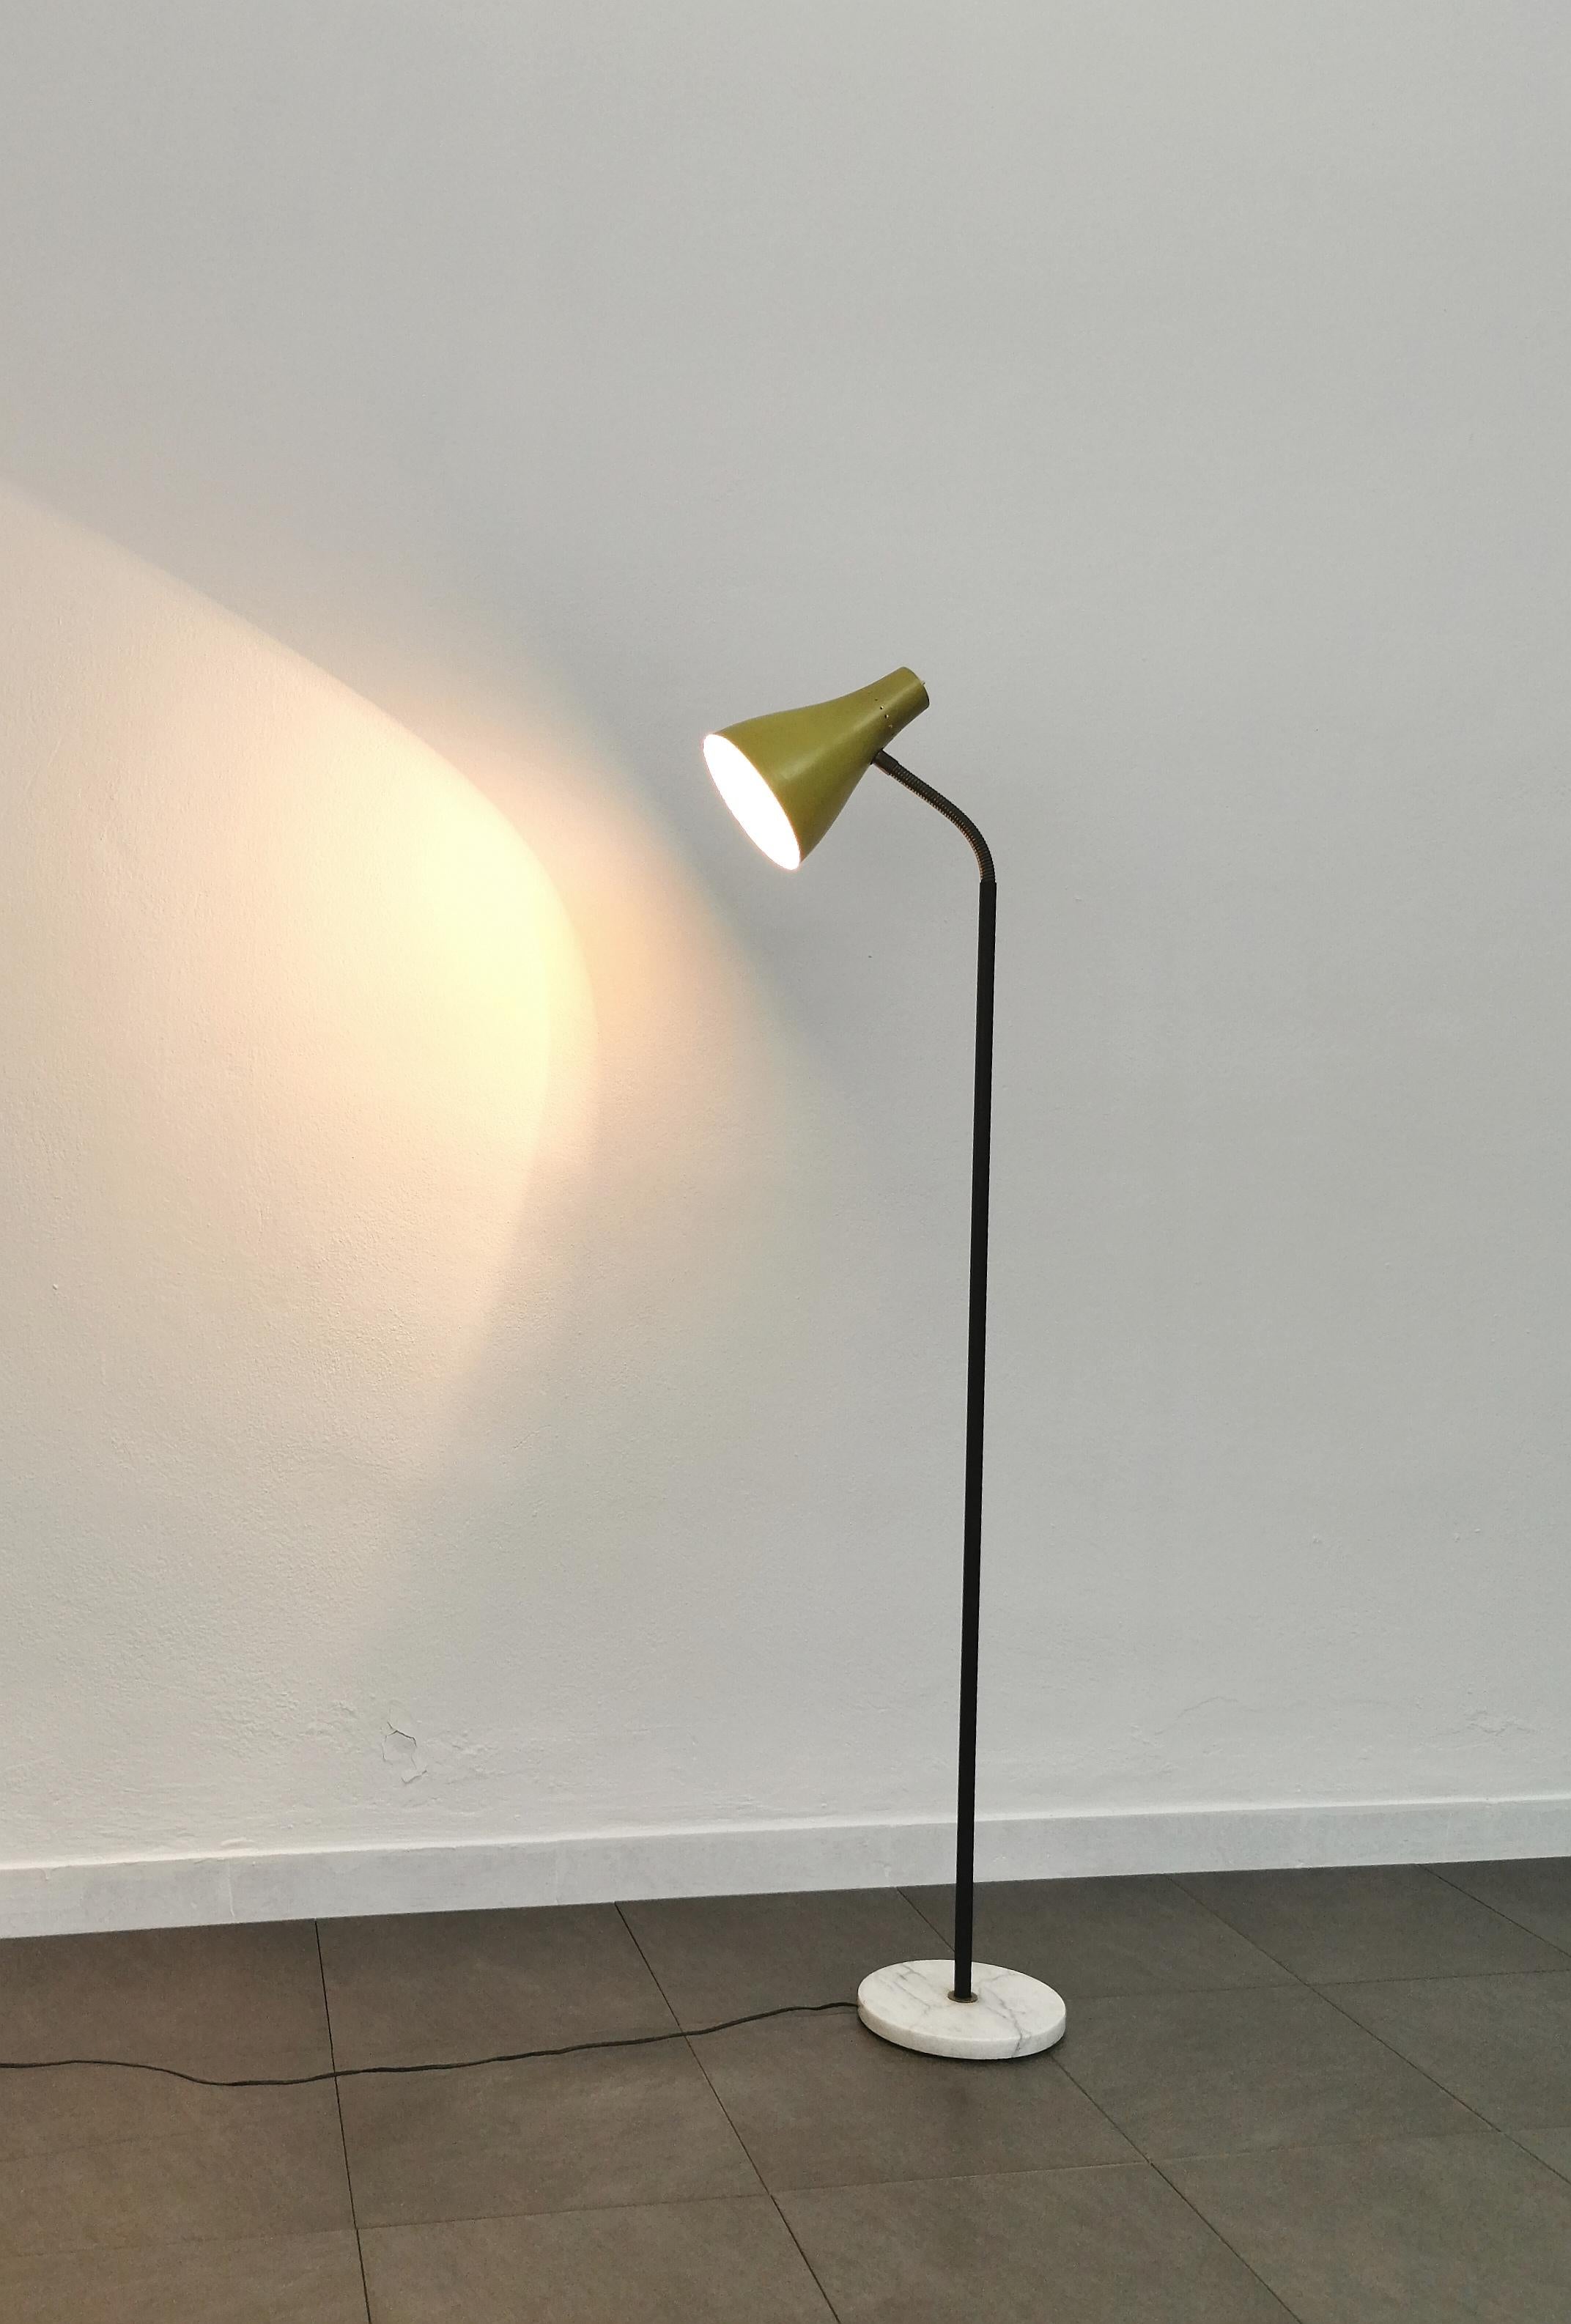 Unusual floor lamp produced in Italy in the 1950s. The lamp was made with a circular marble base, a black enameled metal stem and a yellow enamelled aluminum diffuser supported by a golden flexible.